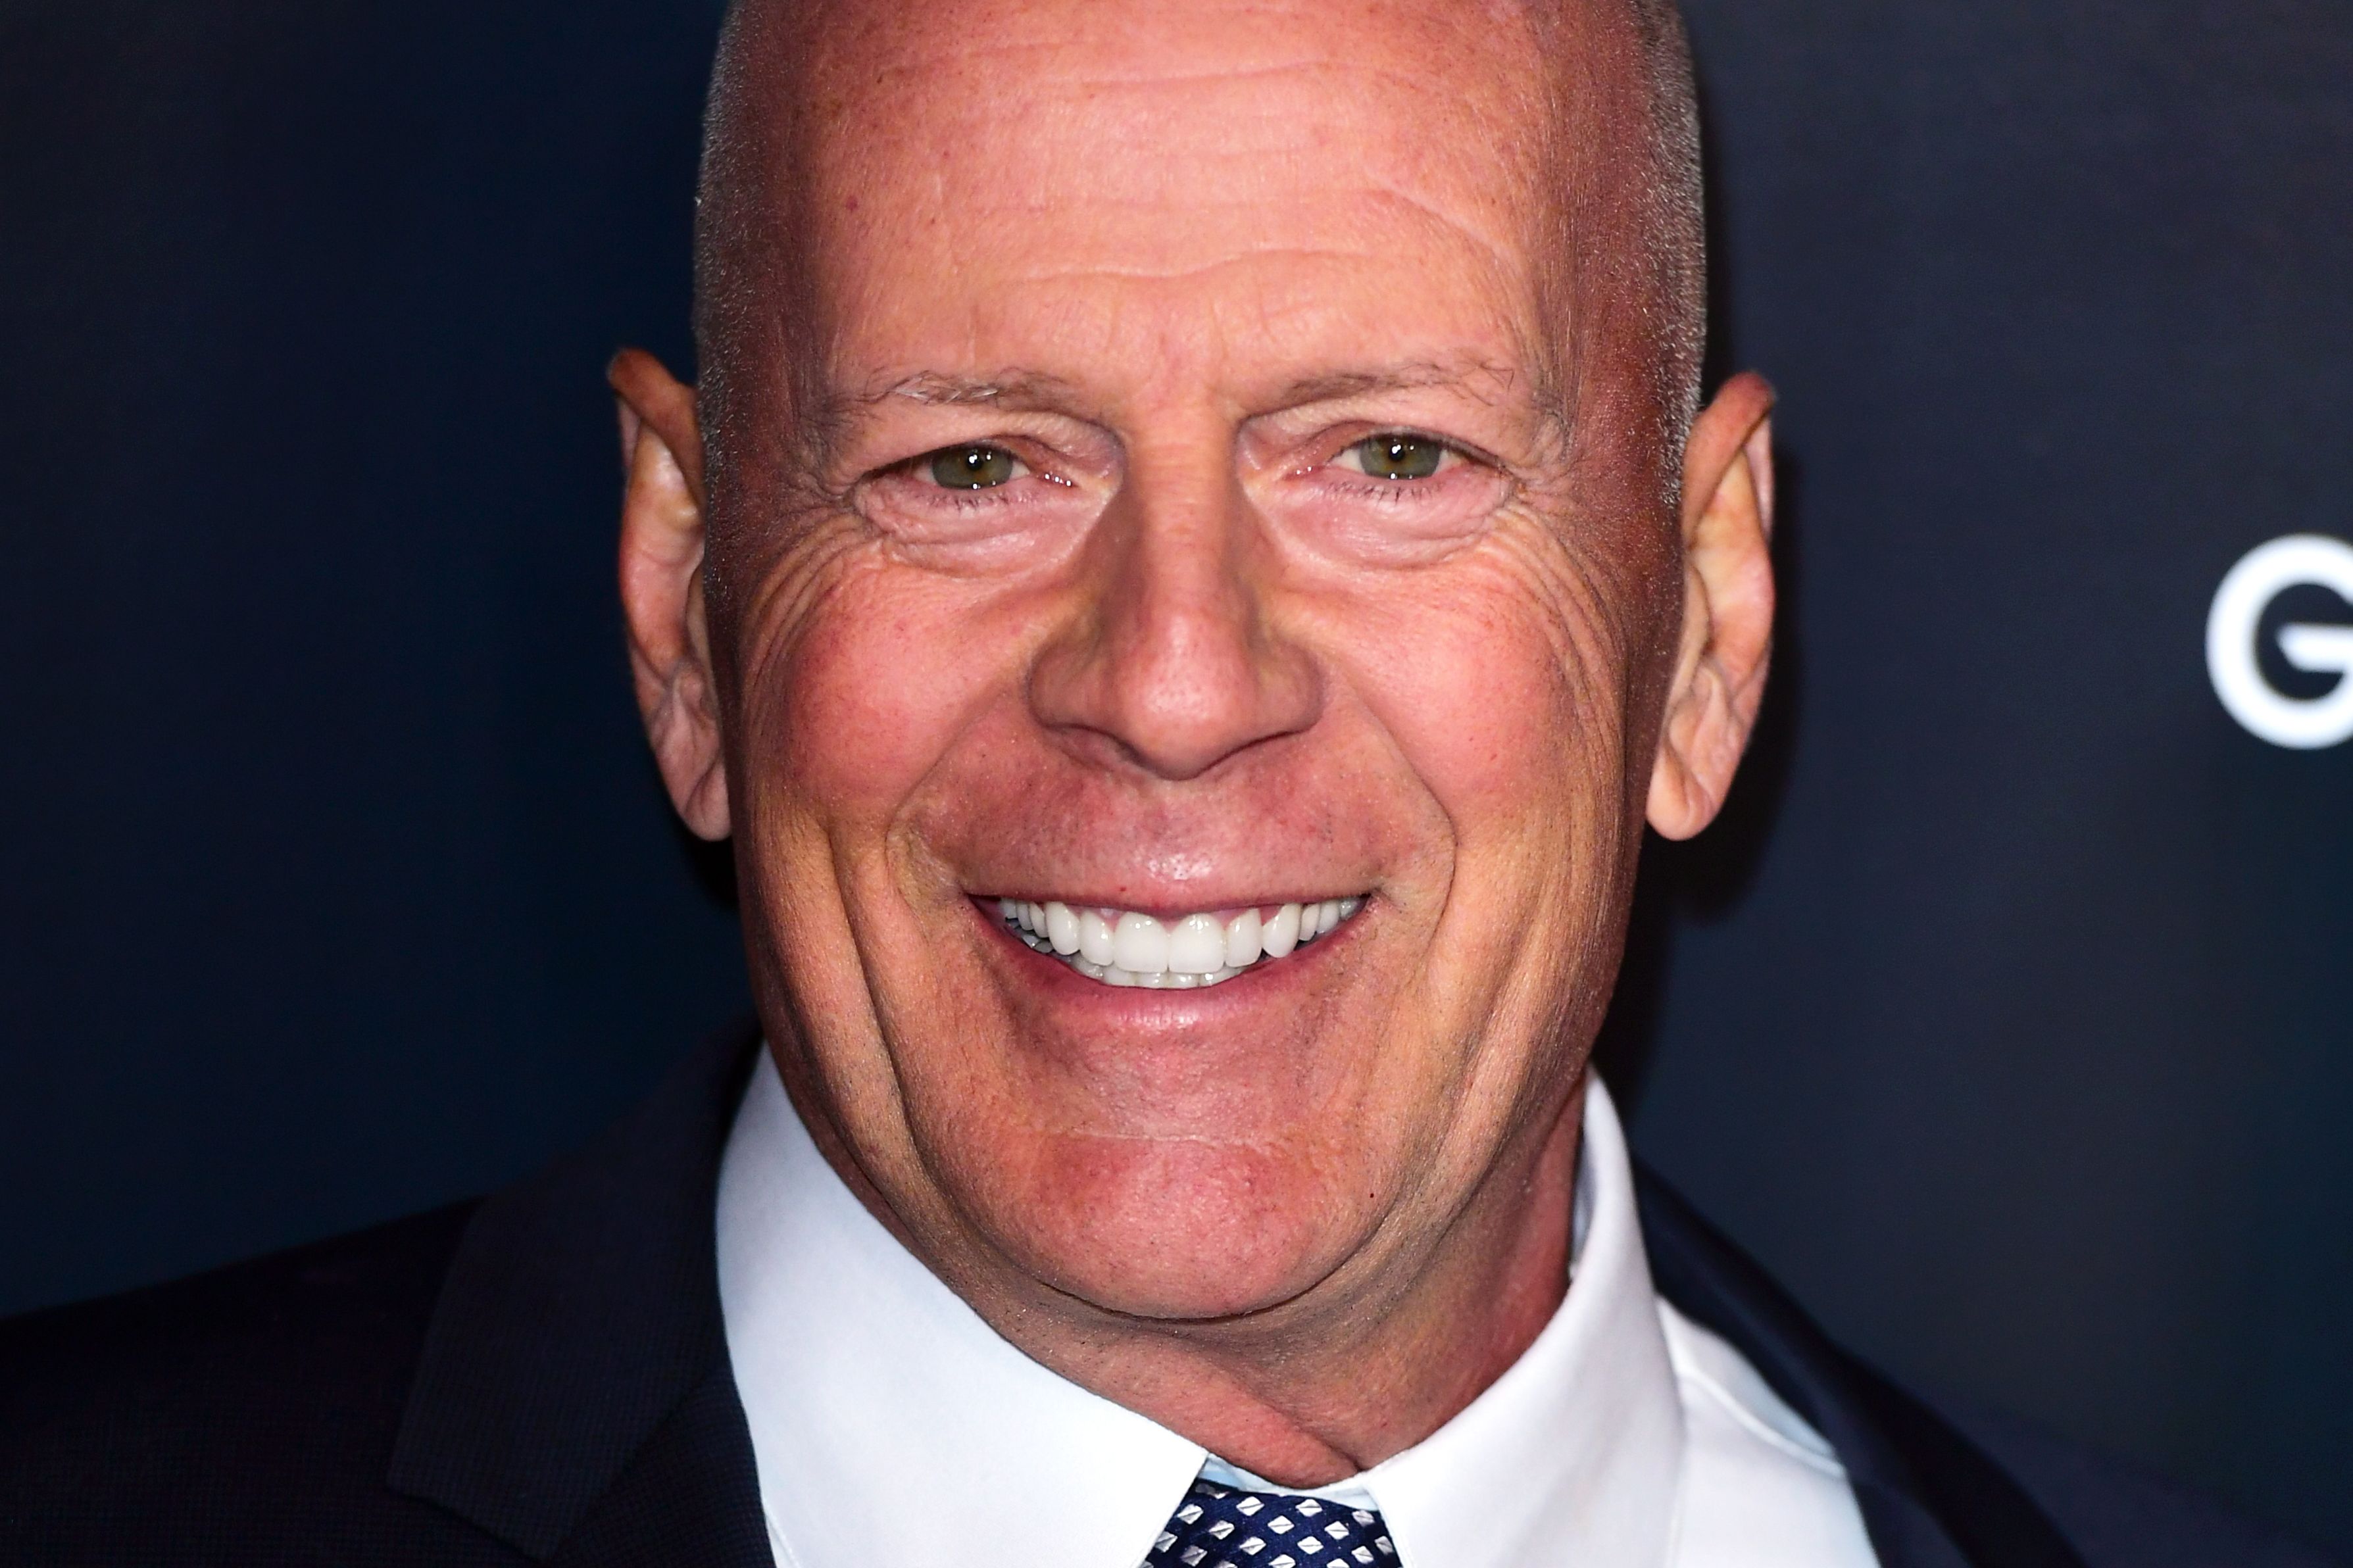 Discovering Bruce Willis’s Self-Awareness: Insights from His Wife about his Condition